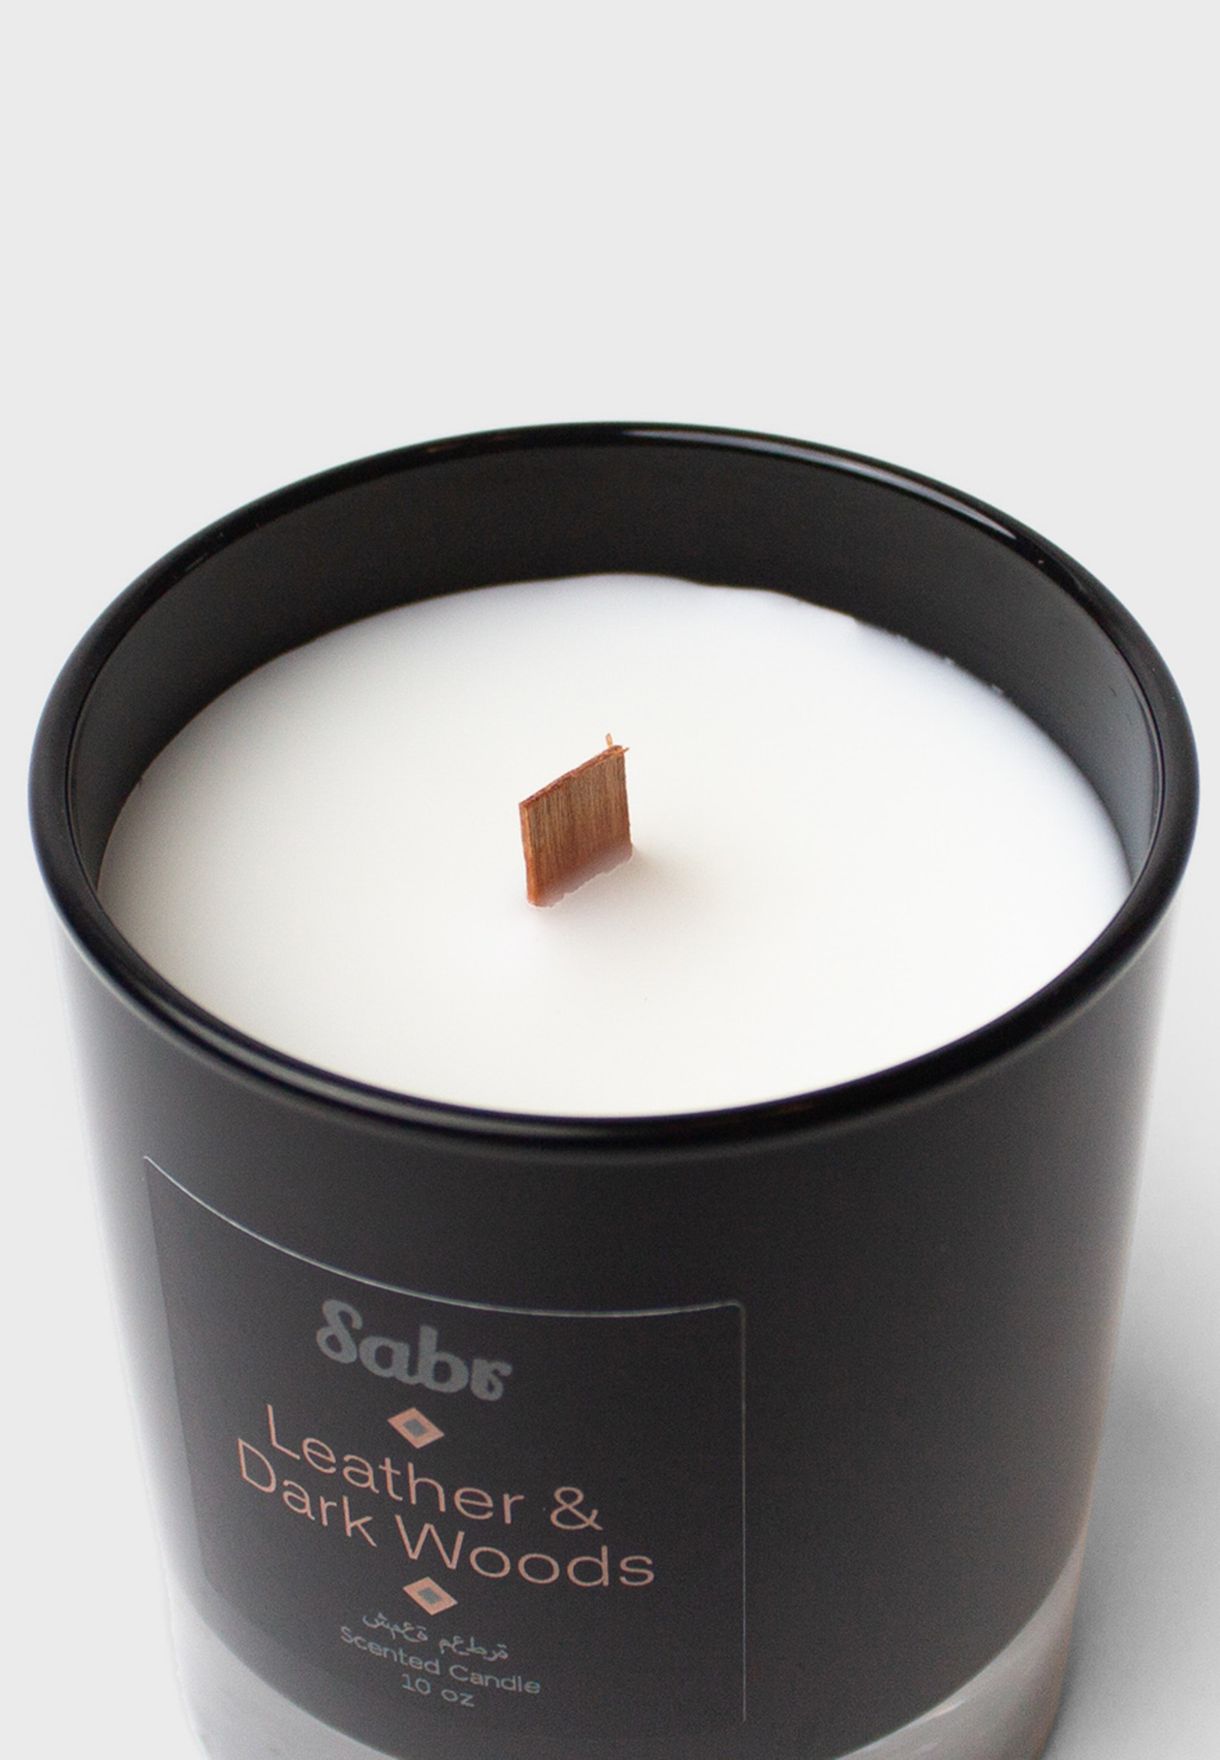 Leather & Dark Wood Woodwick Candle